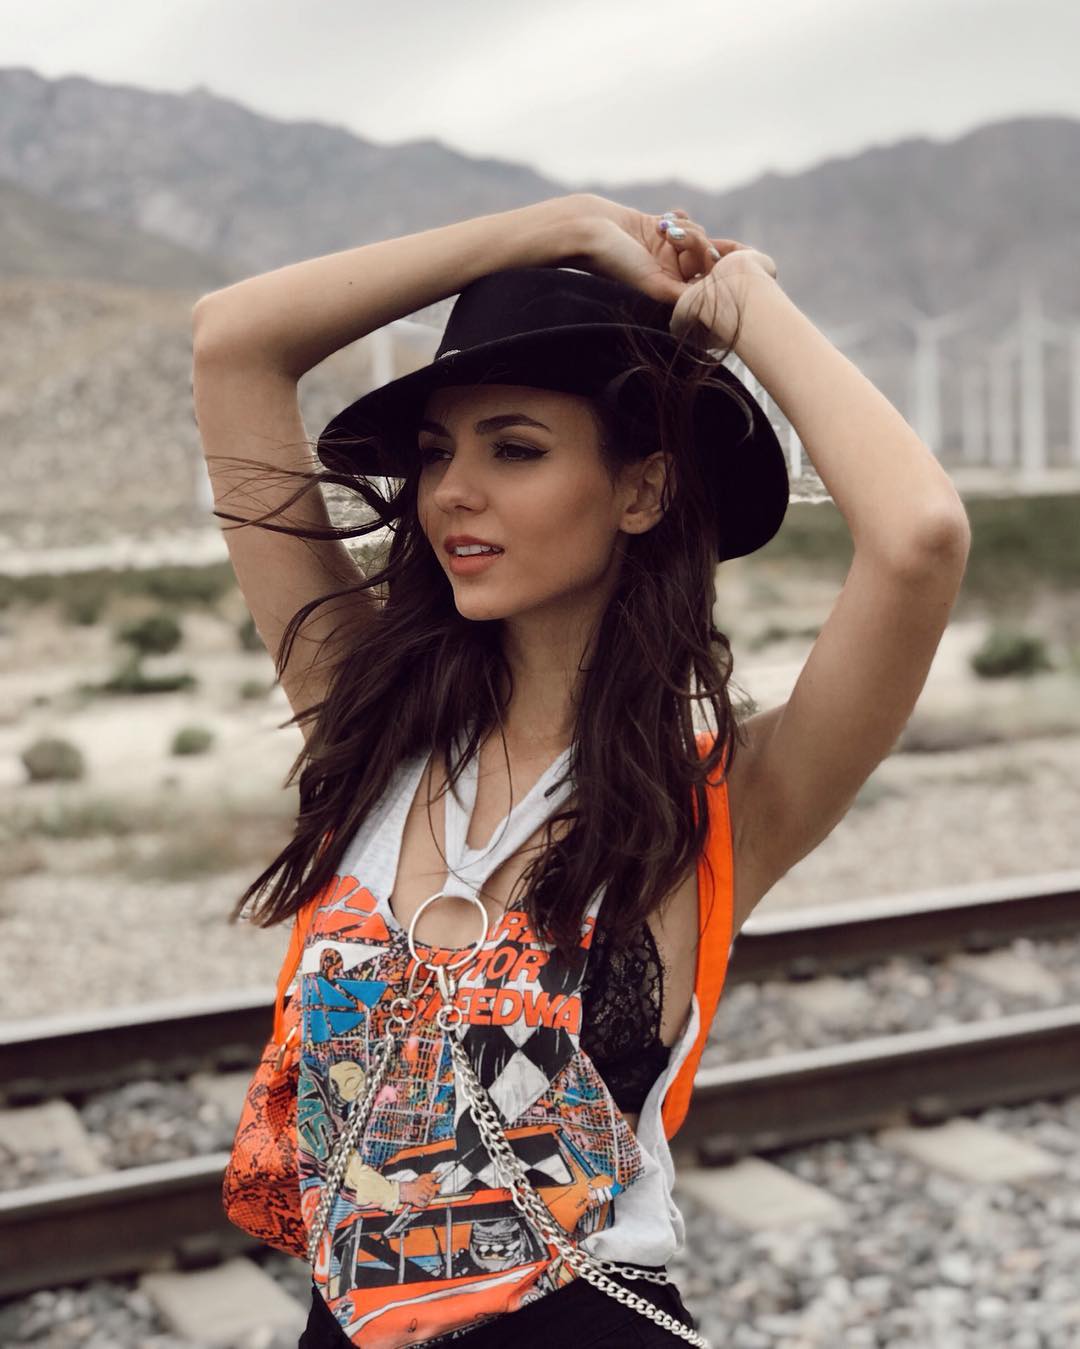 13.9m Followers, 104 Following, 2,050 Posts - See Instagram photos and  videos from Victoria Justice (@victoriajustice)